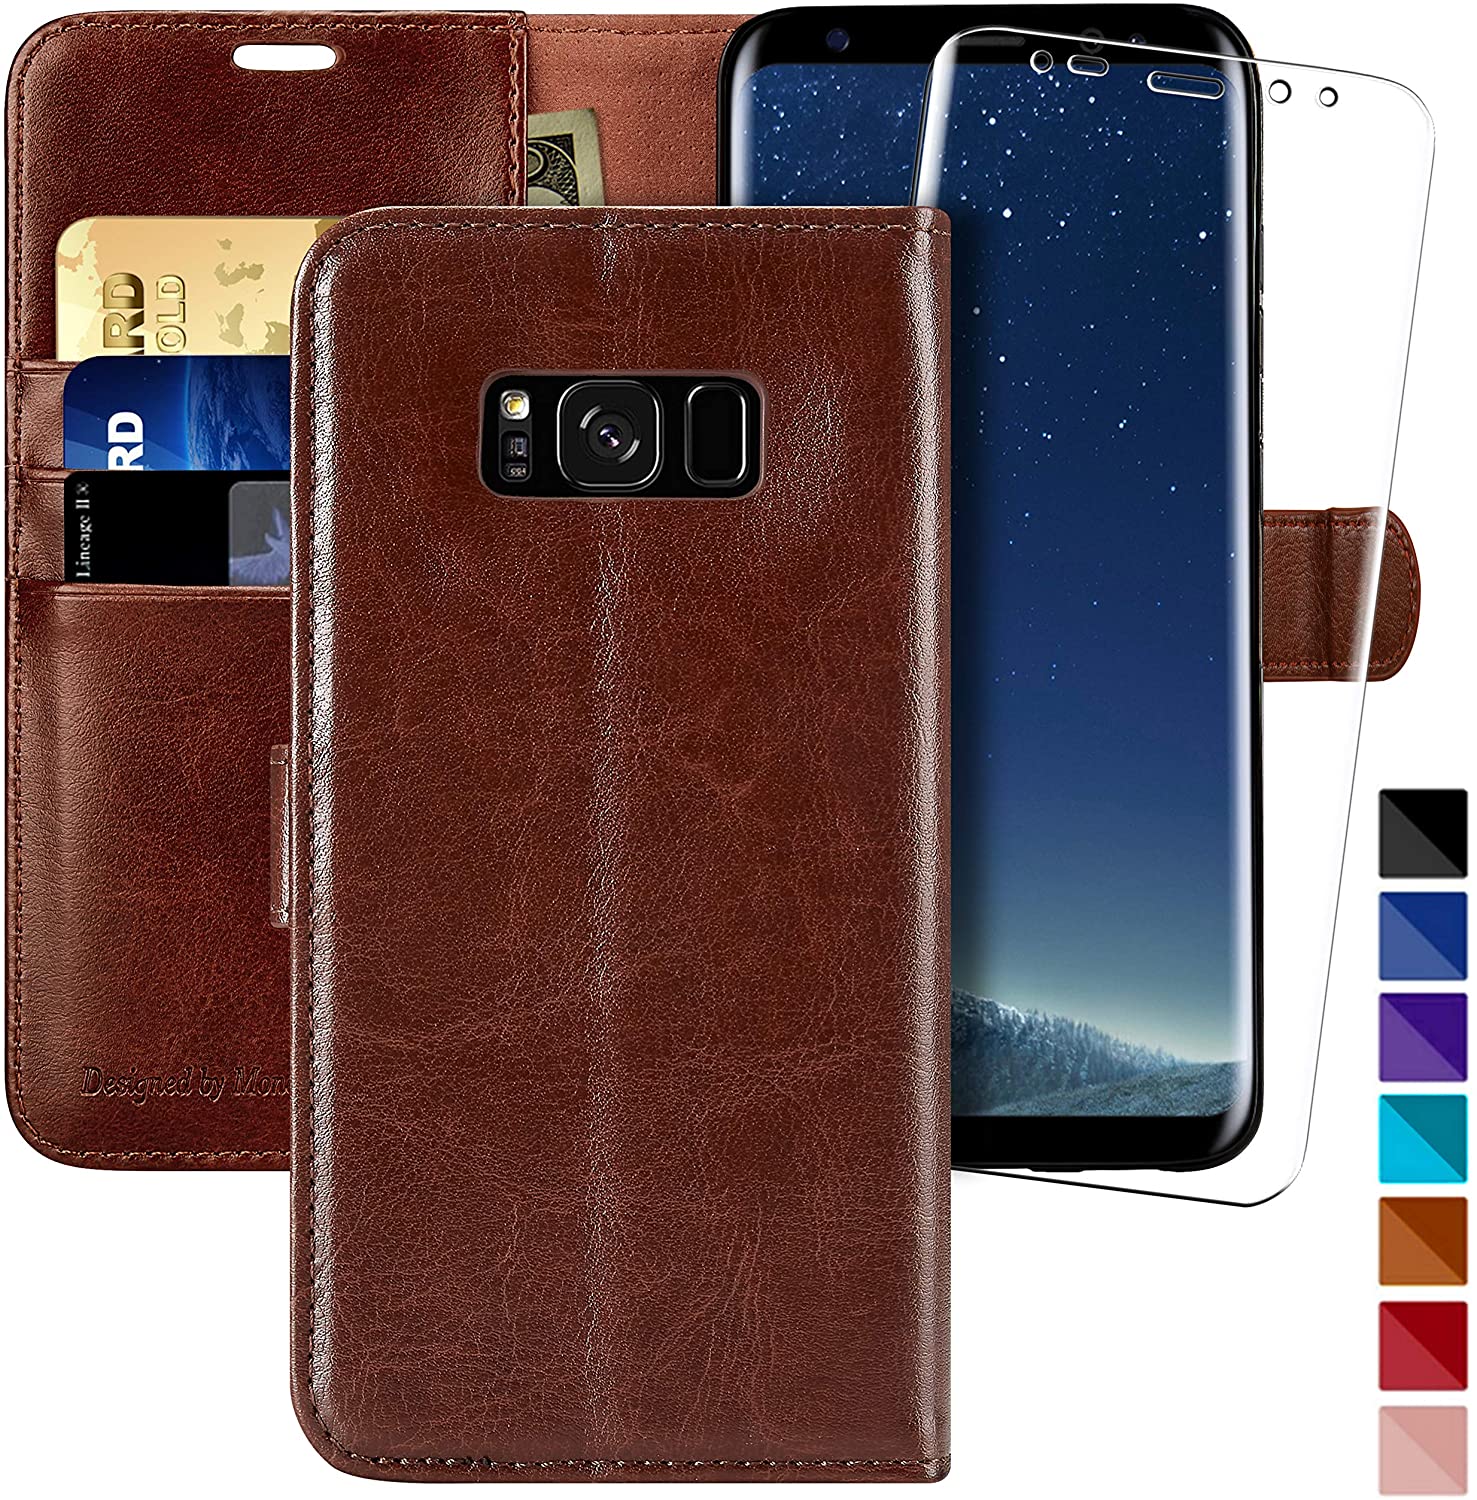 Flip Folio Leather Cell Phone Cover with Credit Card Holder for Samsung Galaxy S8 - BROWN - e4cents